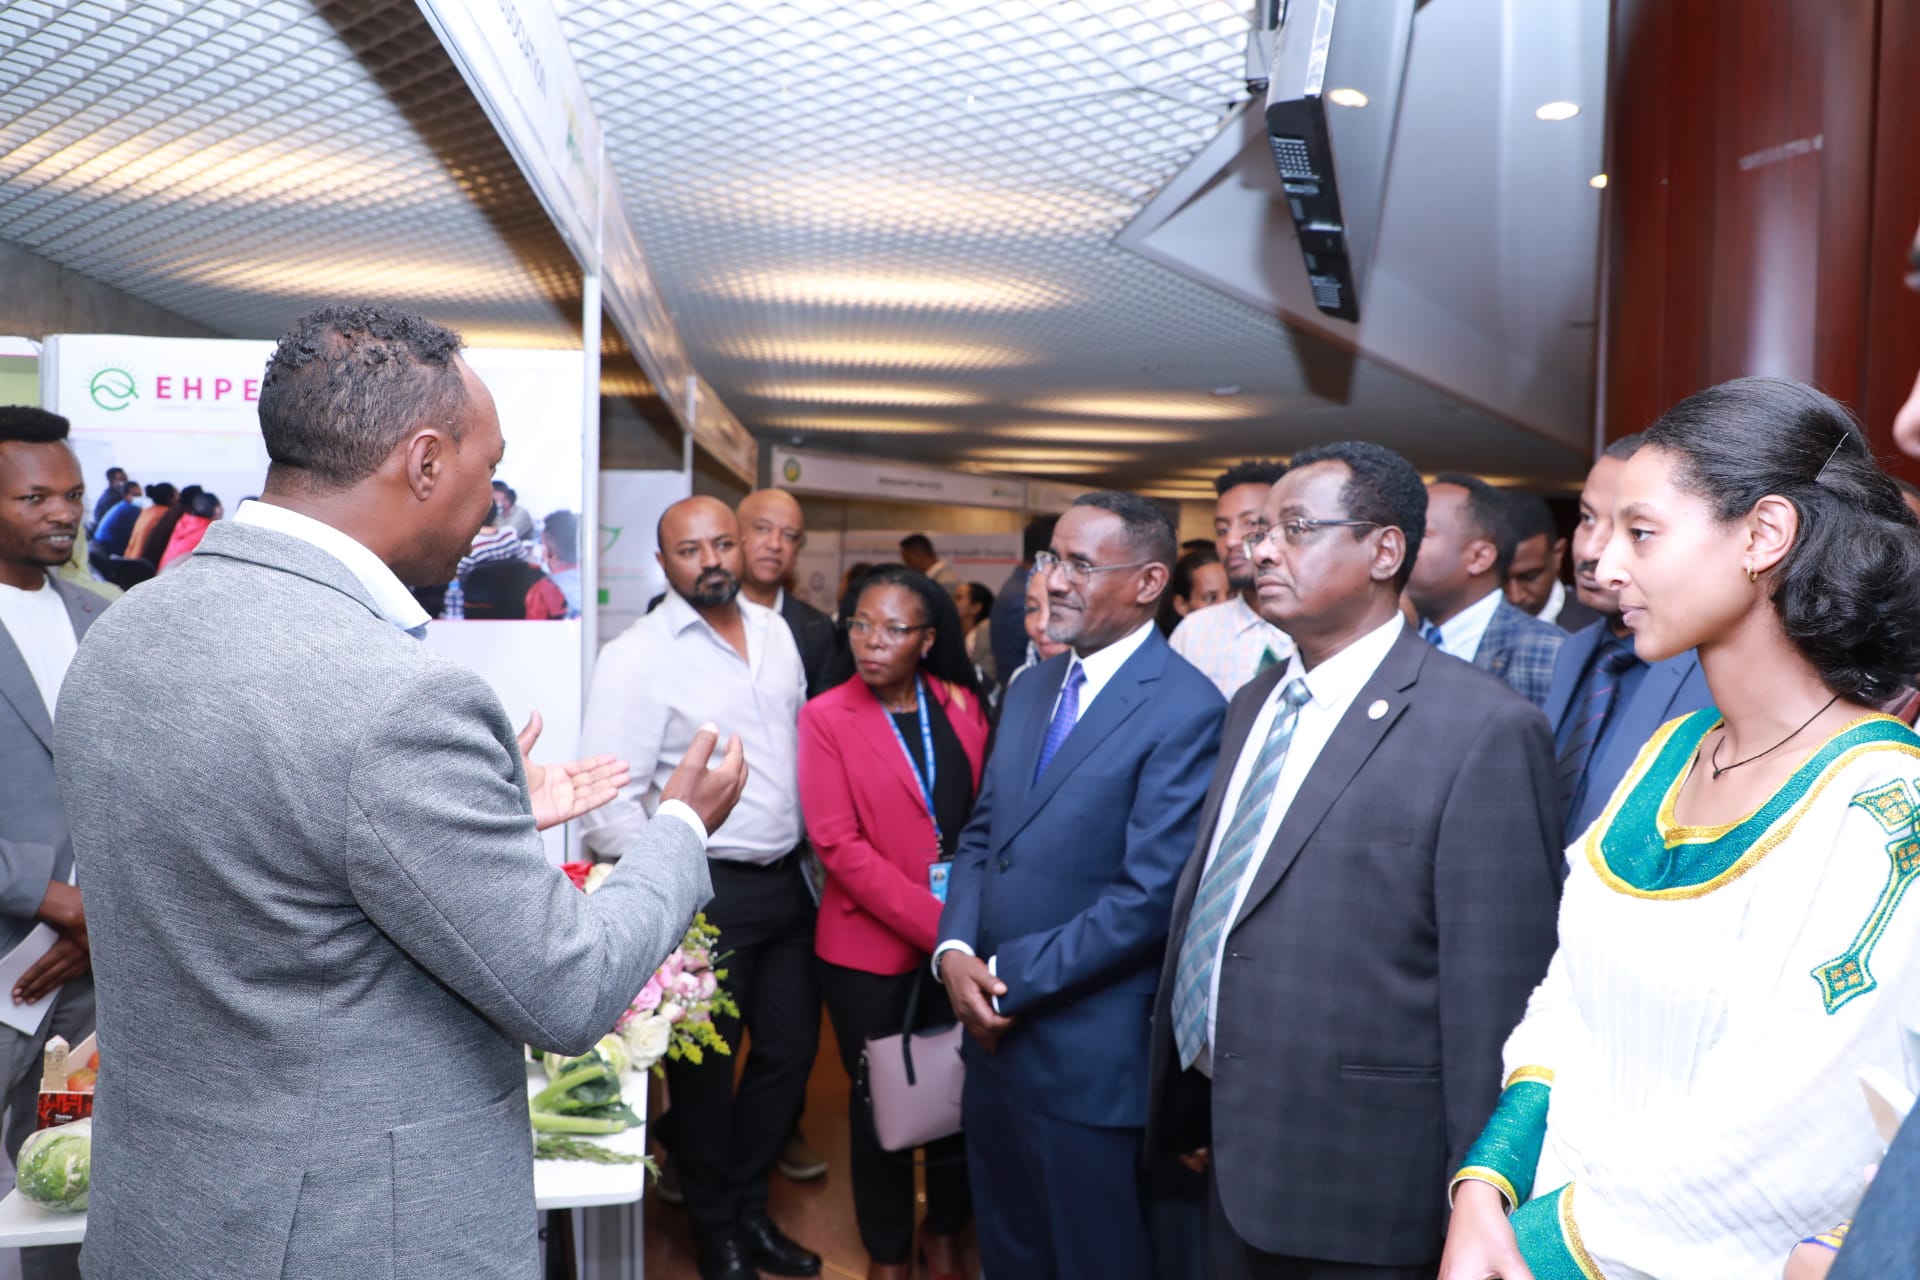 Ethiopia’s Agriculture Minister, Oumer Hussien, visited EHPEA booth at the opening of ‘Shaping Agriculture for Better Impact’ conference.